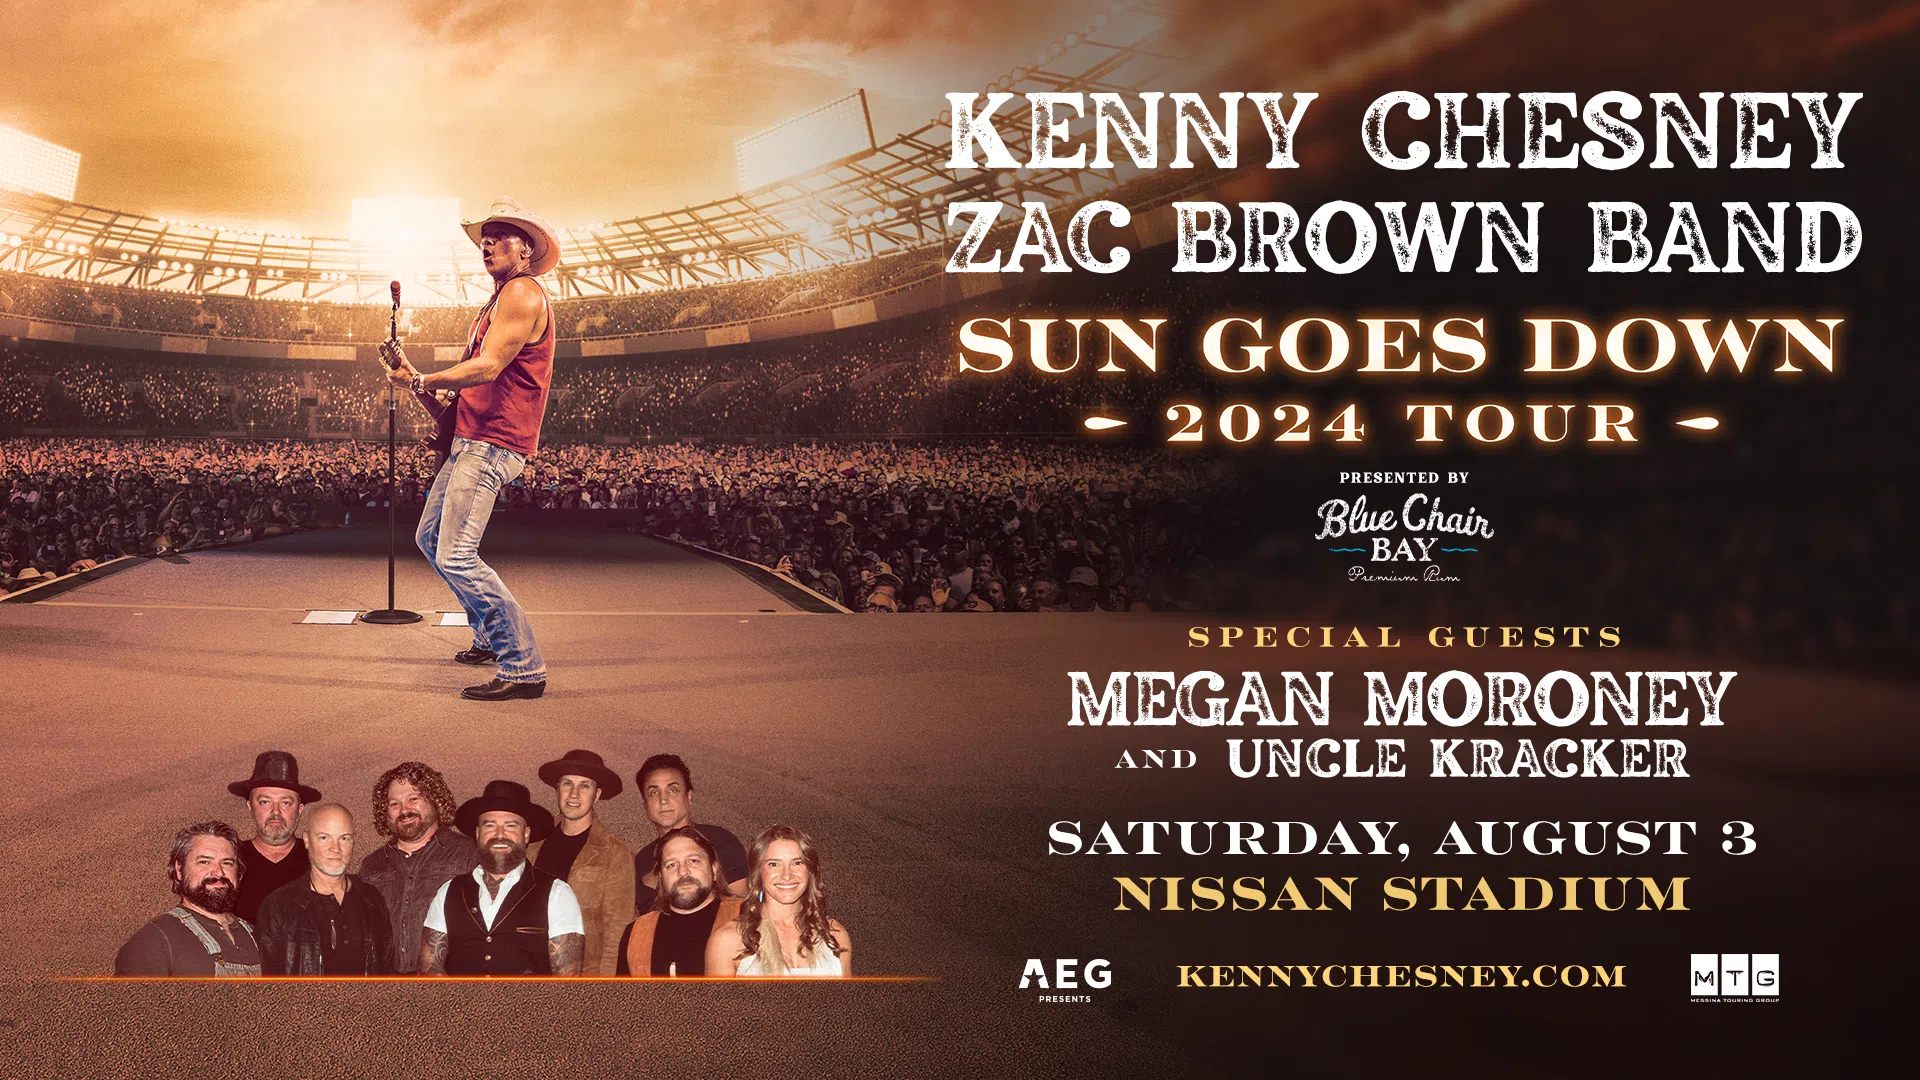 Kenny Chesney and Zach Brown Band Sun Goes Down Tour 2024! 94.7 The